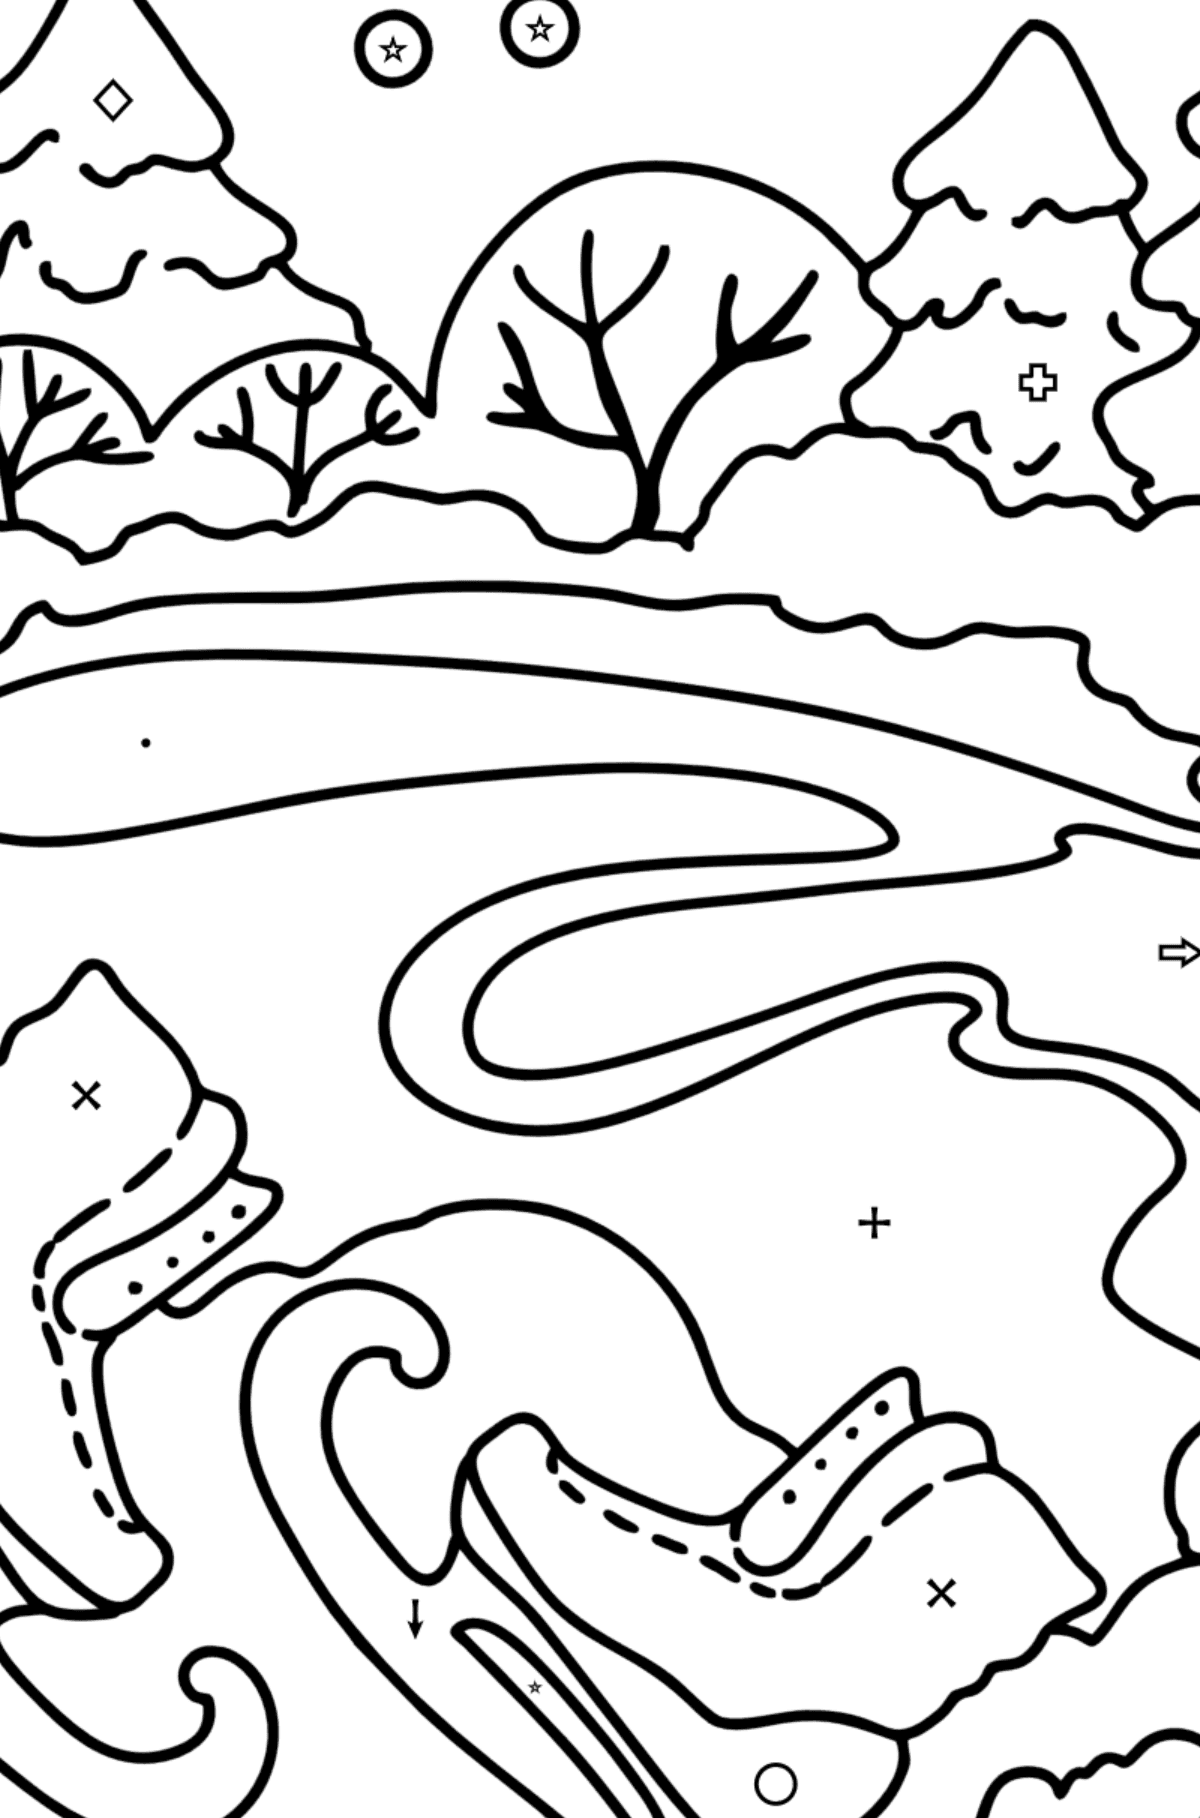 Coloring page - Winter and skates - Coloring by Symbols and Geometric Shapes for Kids